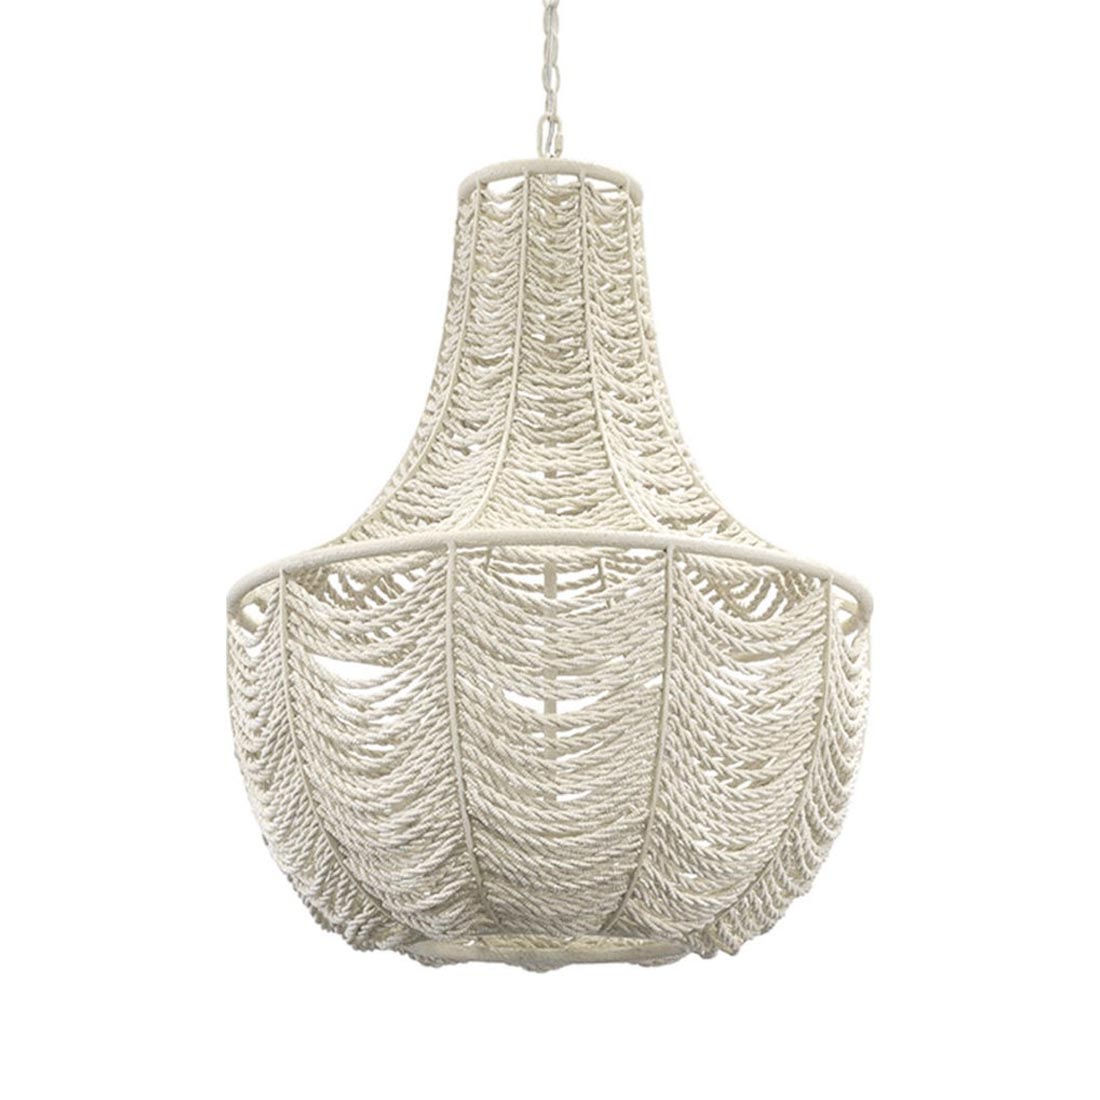 Palecek | Cabrillo Chandelier 24.5Hx27Wx 27D Metal Hand-sewn Coconut Shell Beads